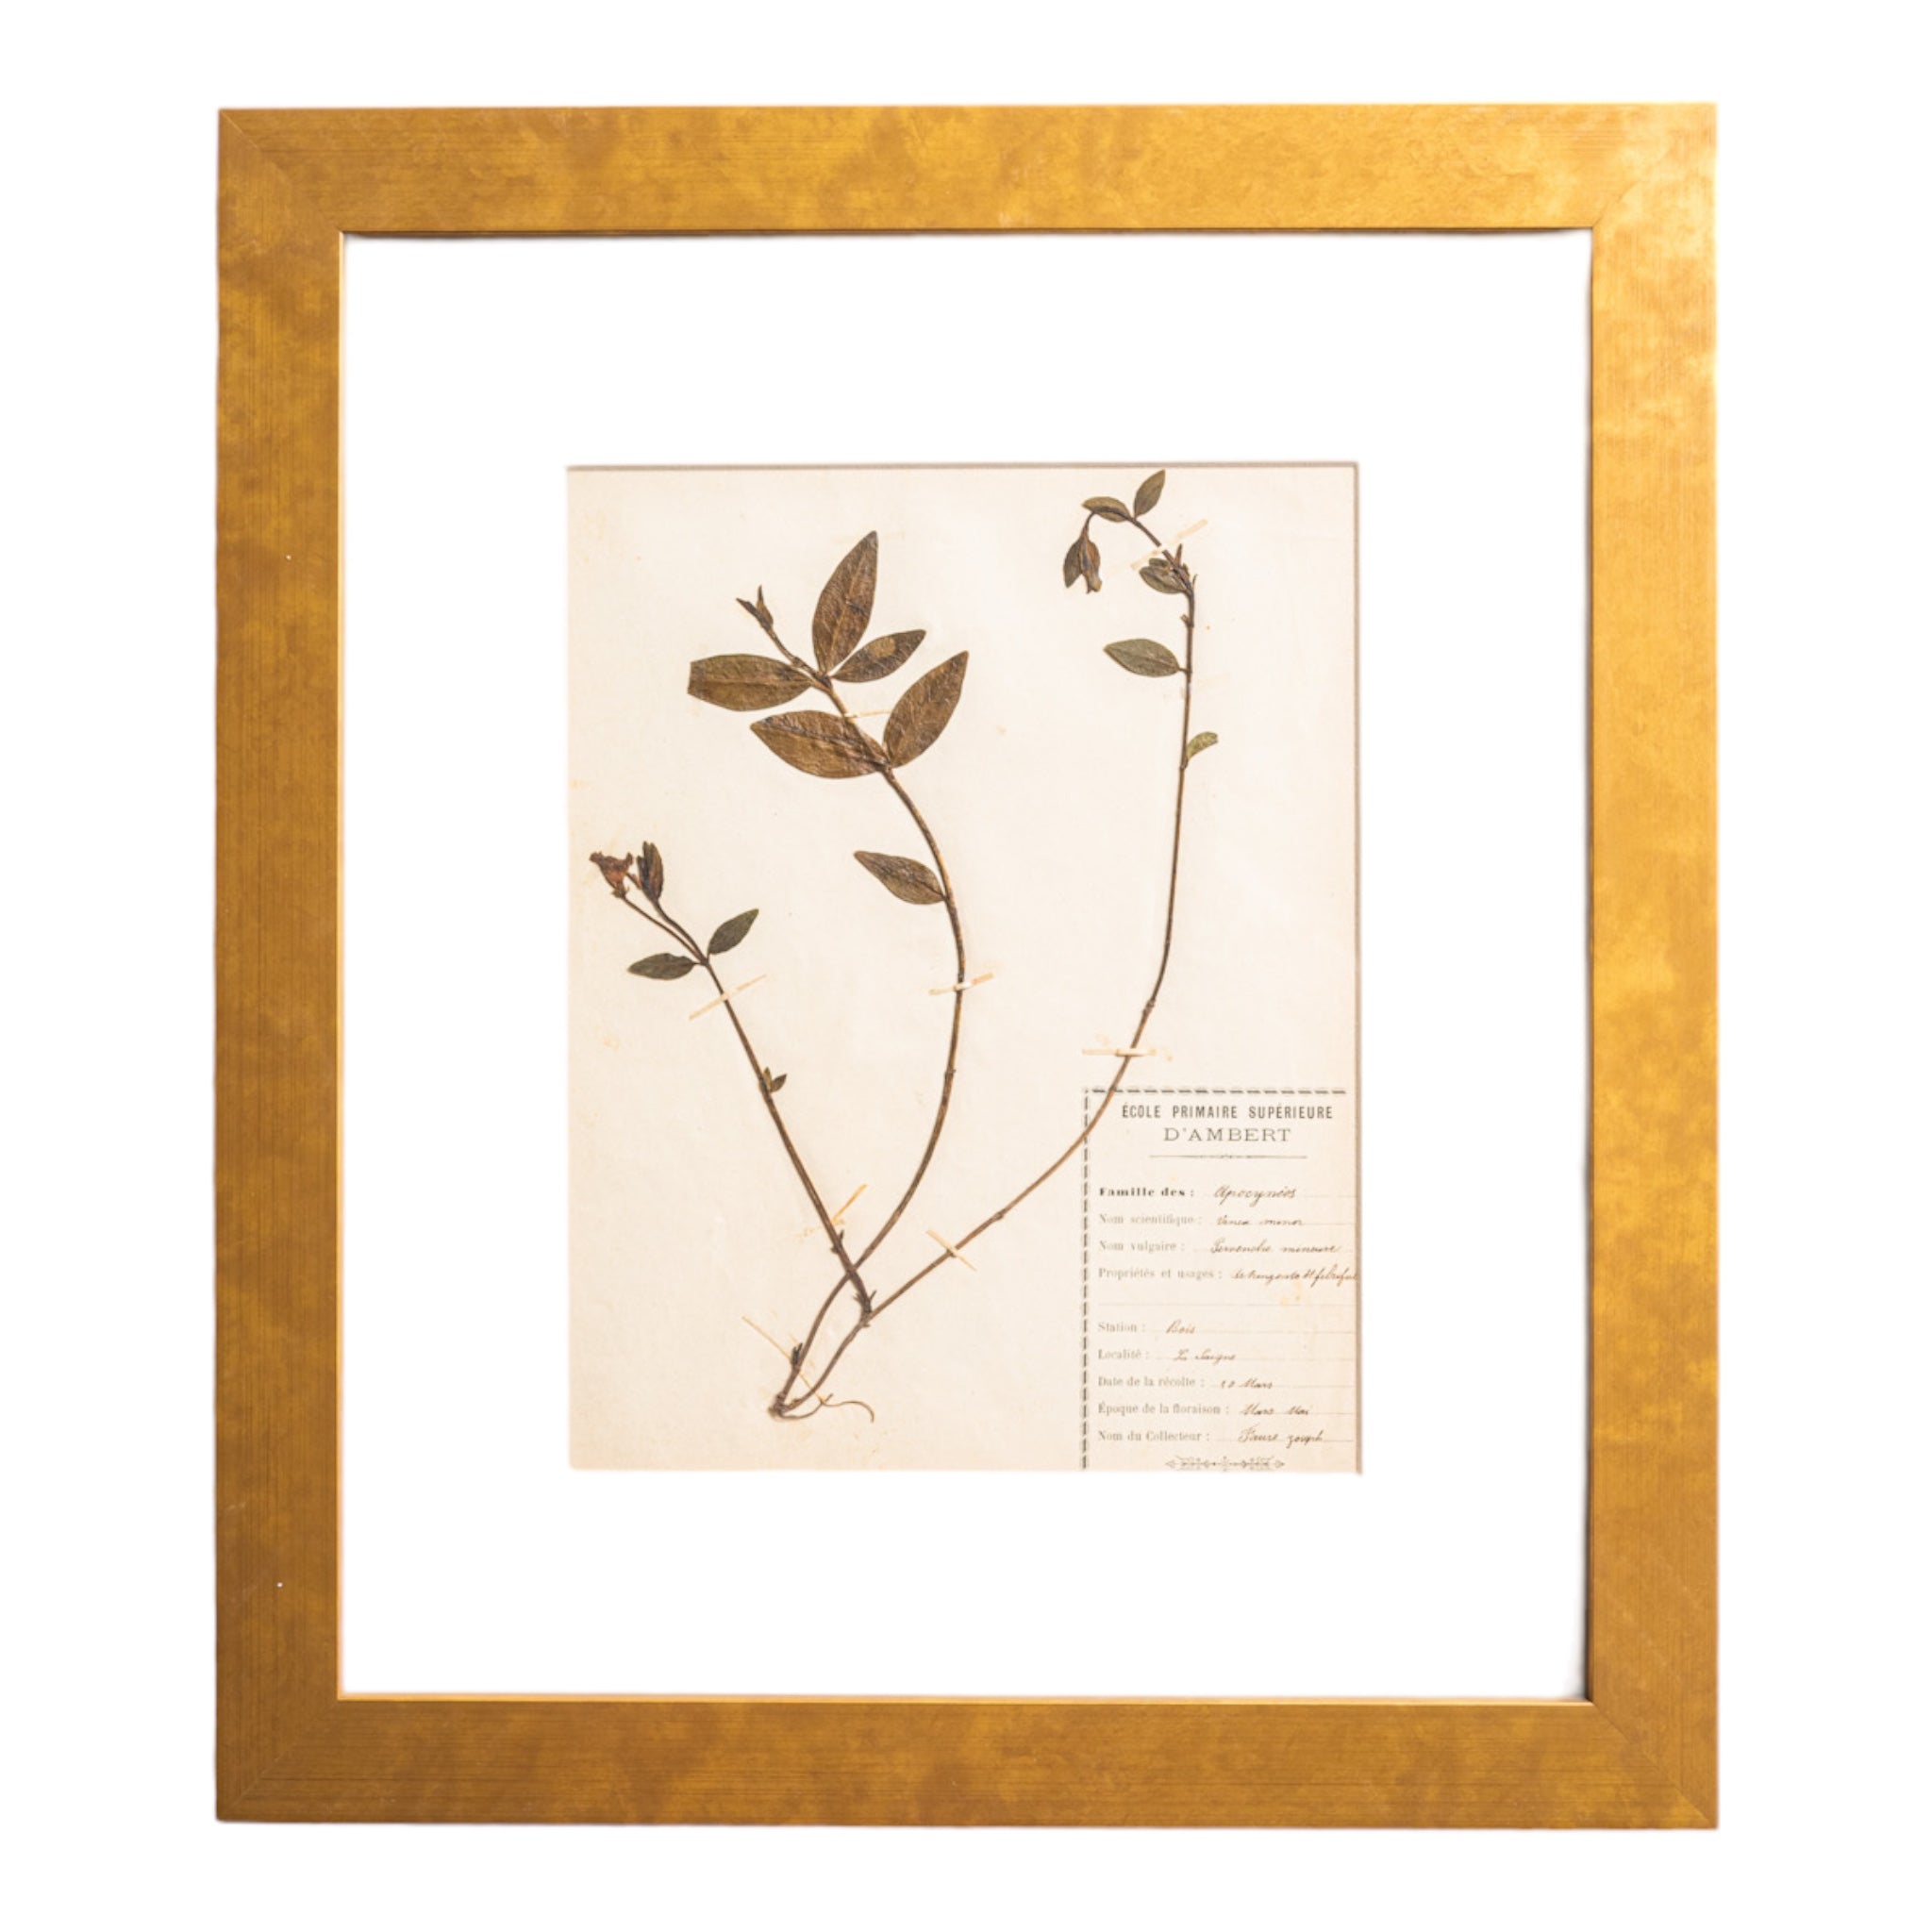 Framed art decor of vintage French pressed botanicals with species Latin name as well as the common name listed.  